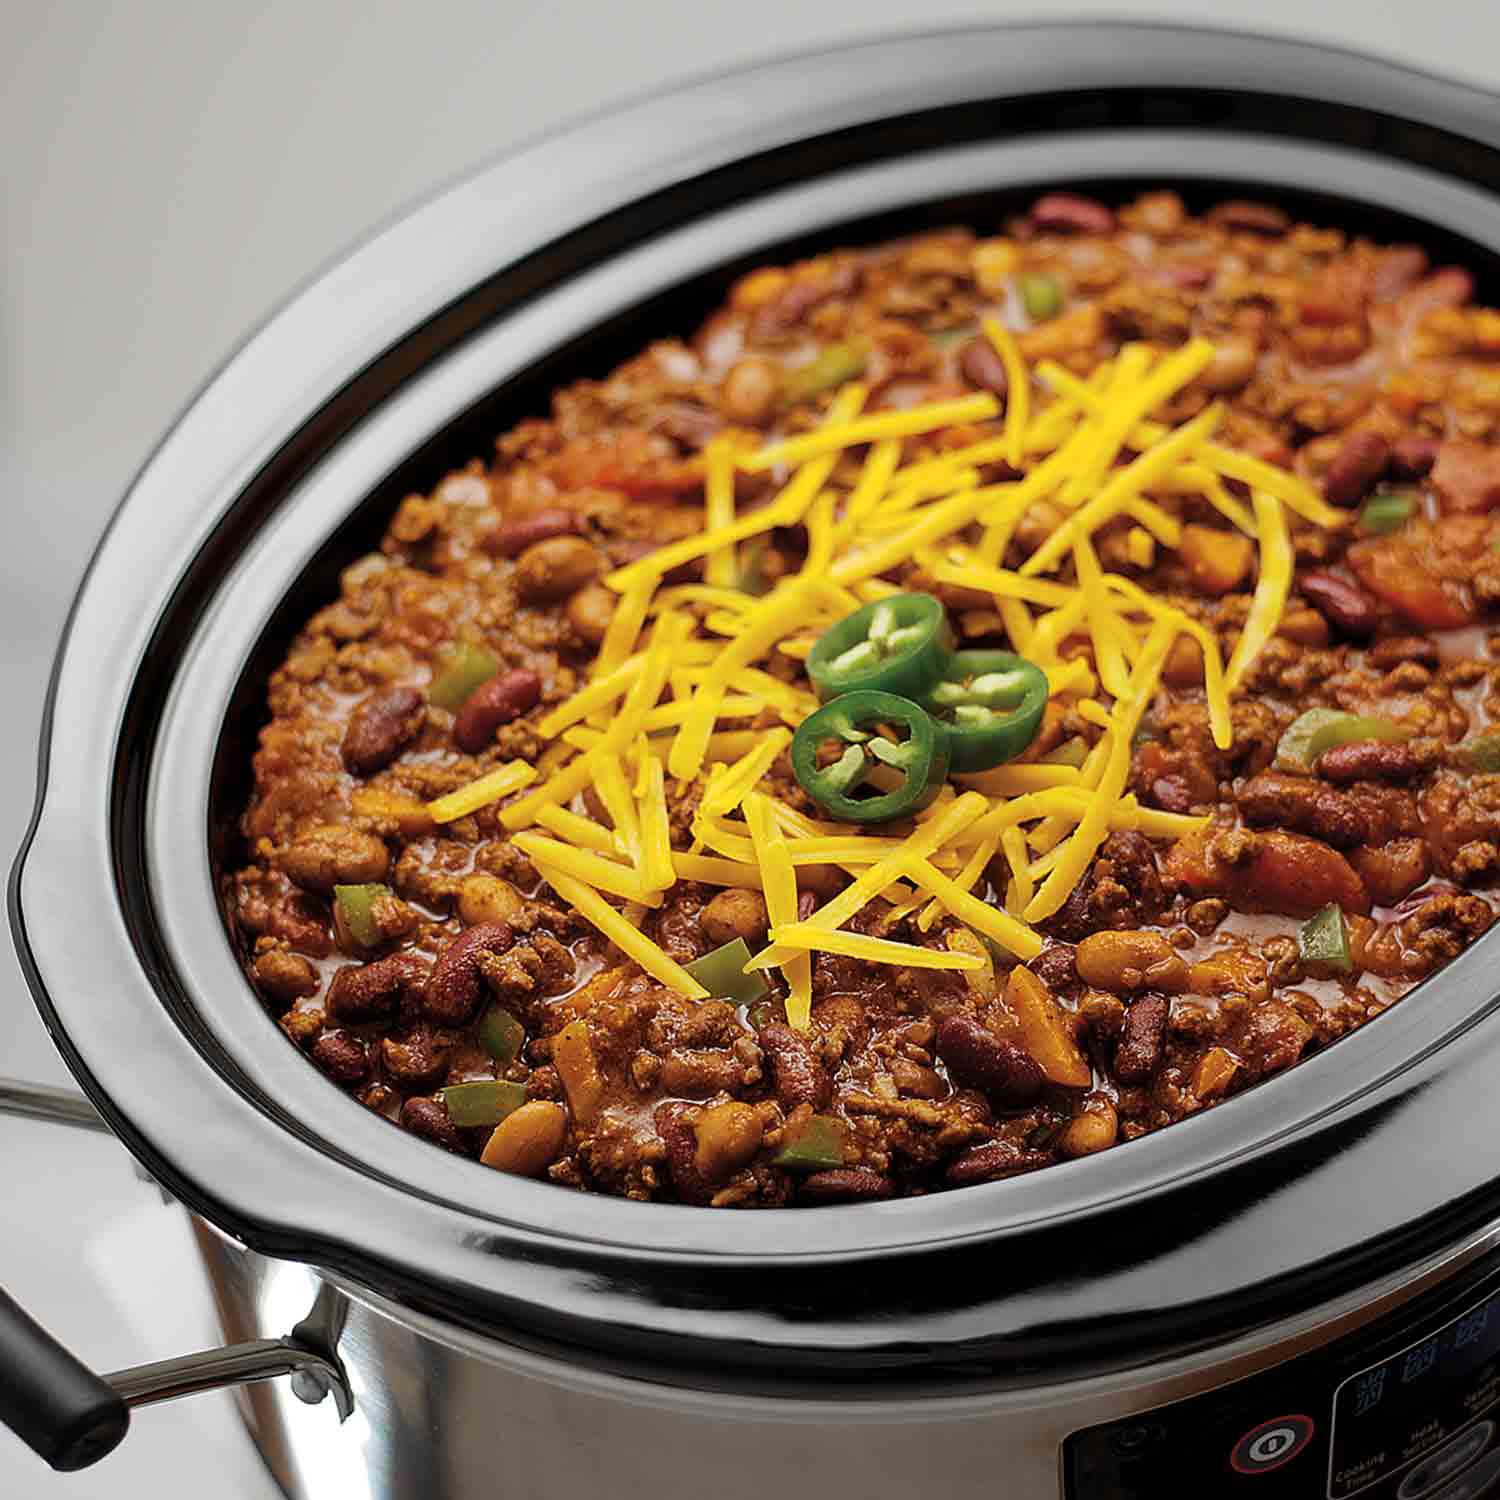 Everyone is a fan of the Hamilton Beach® Stay or Go® 5 Qt. Programmable Slow Cooker